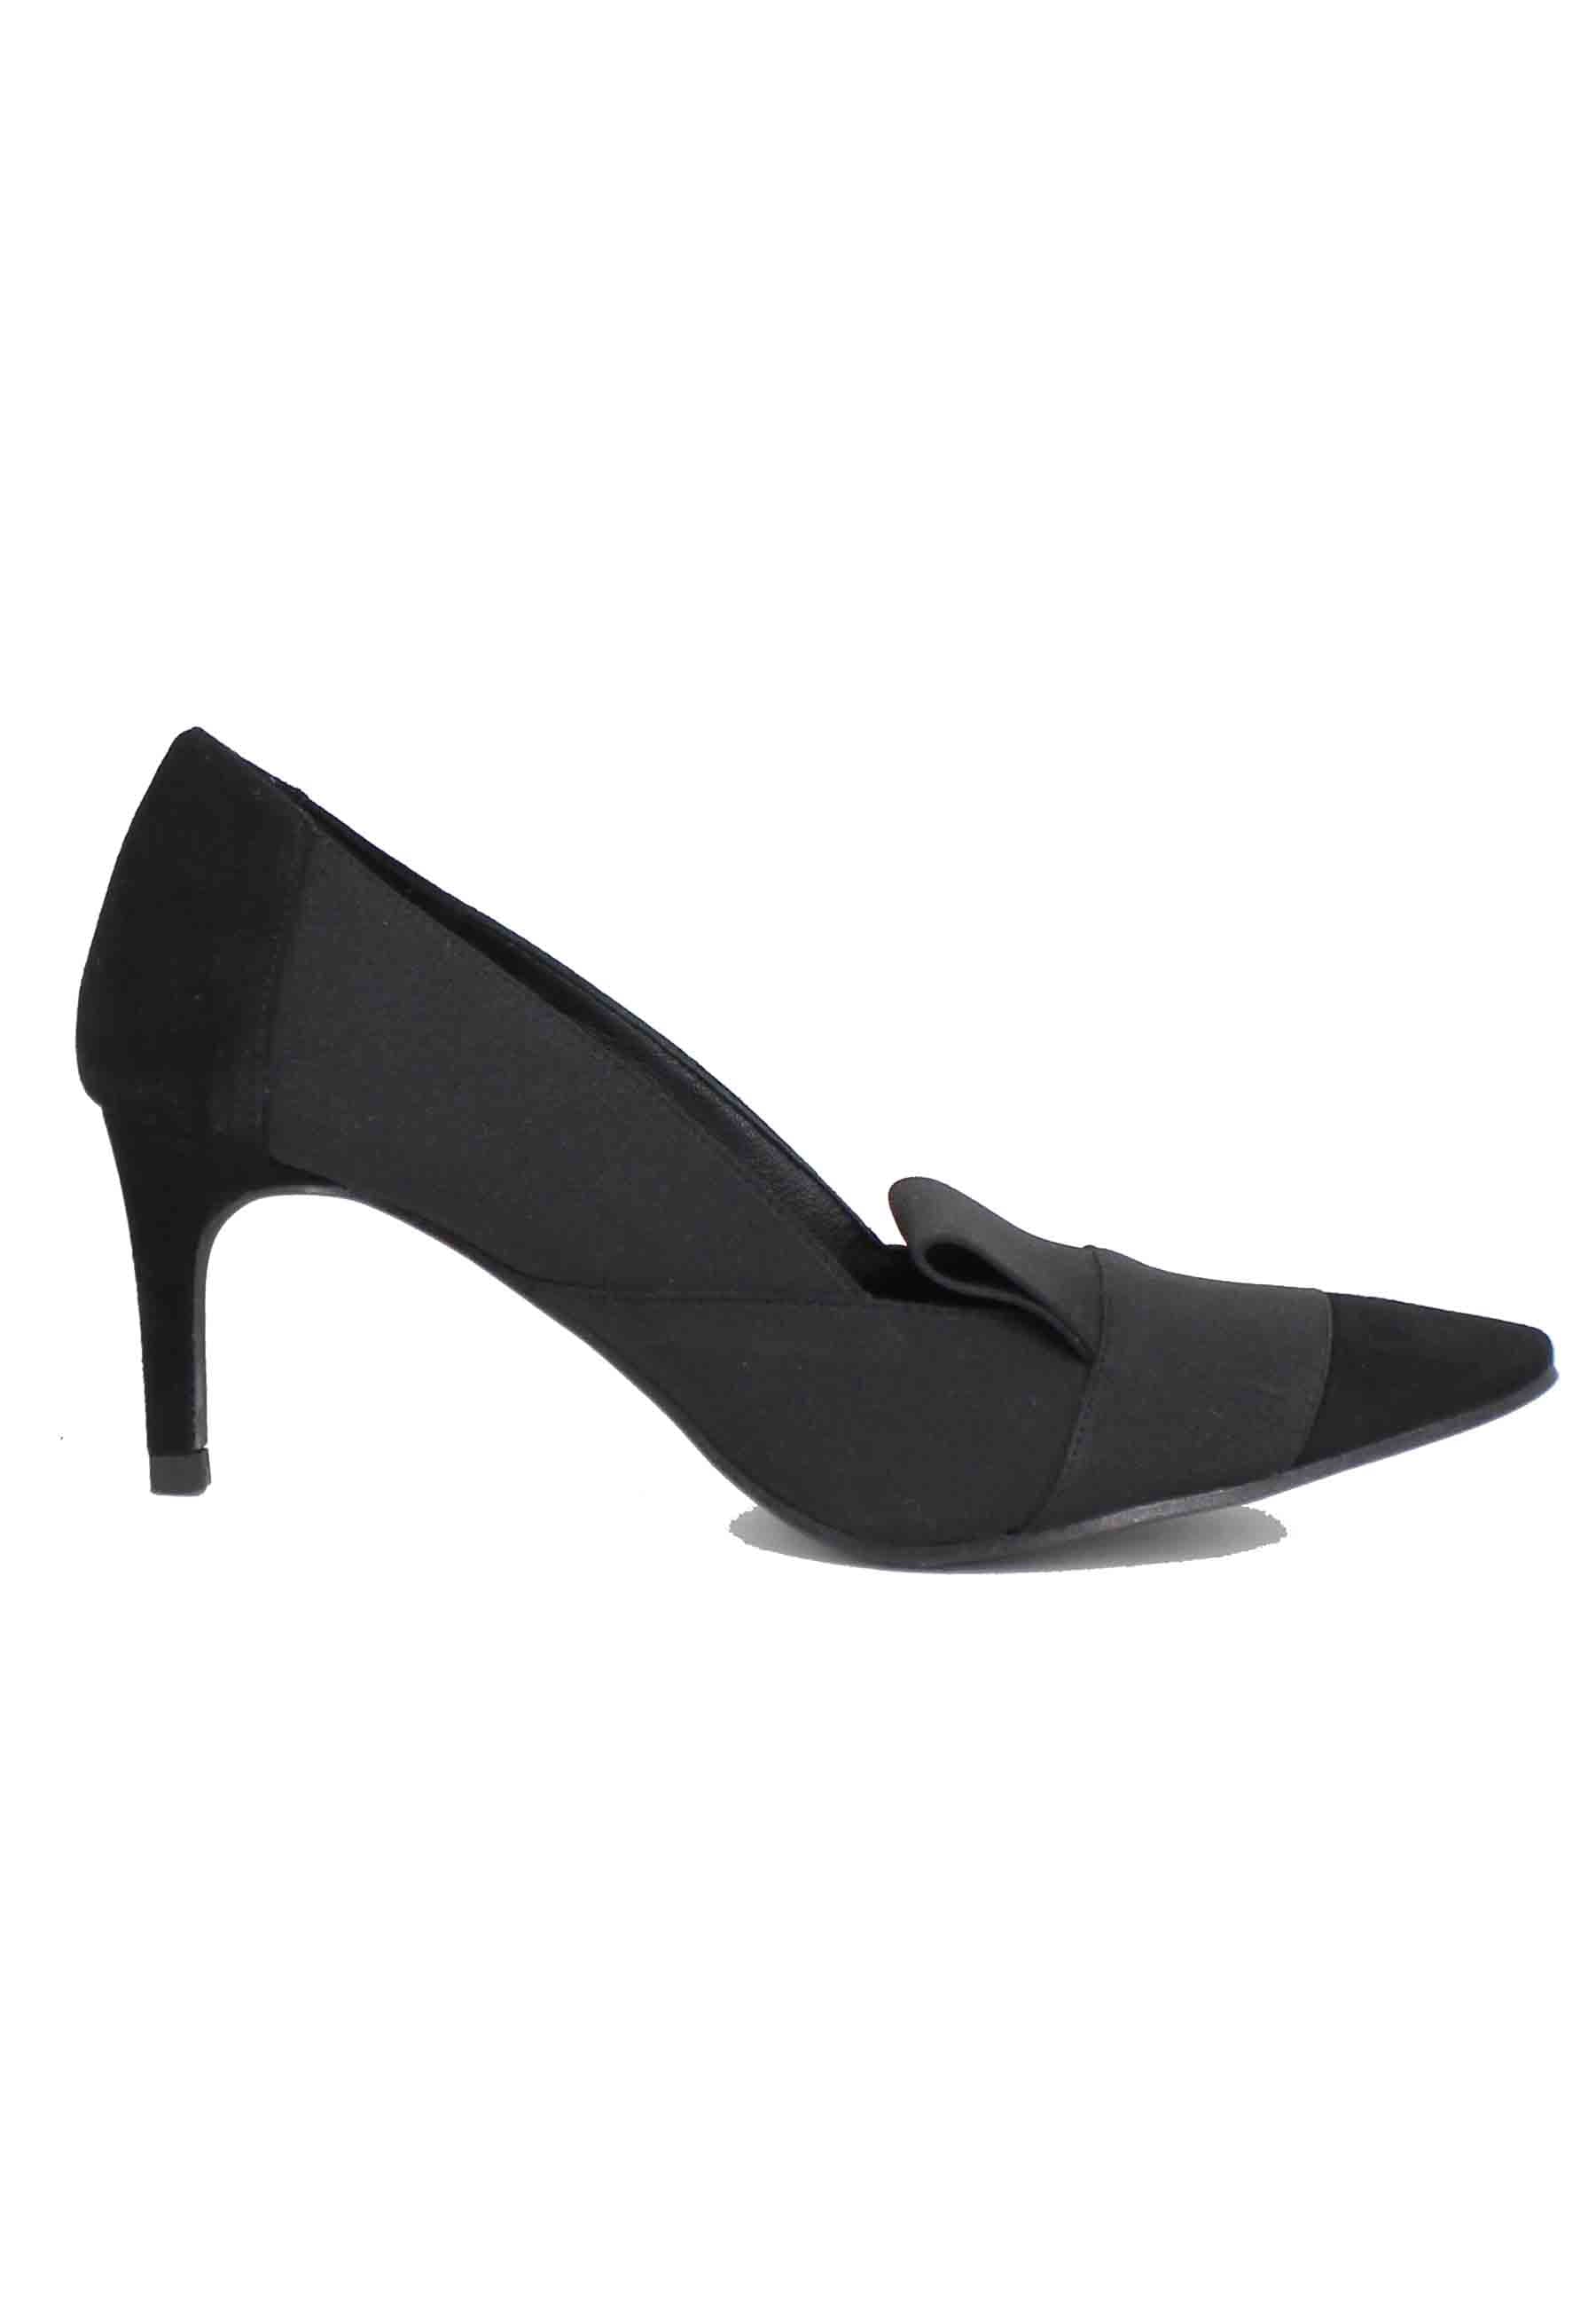 Women's decollete in black suede with fabric inserts